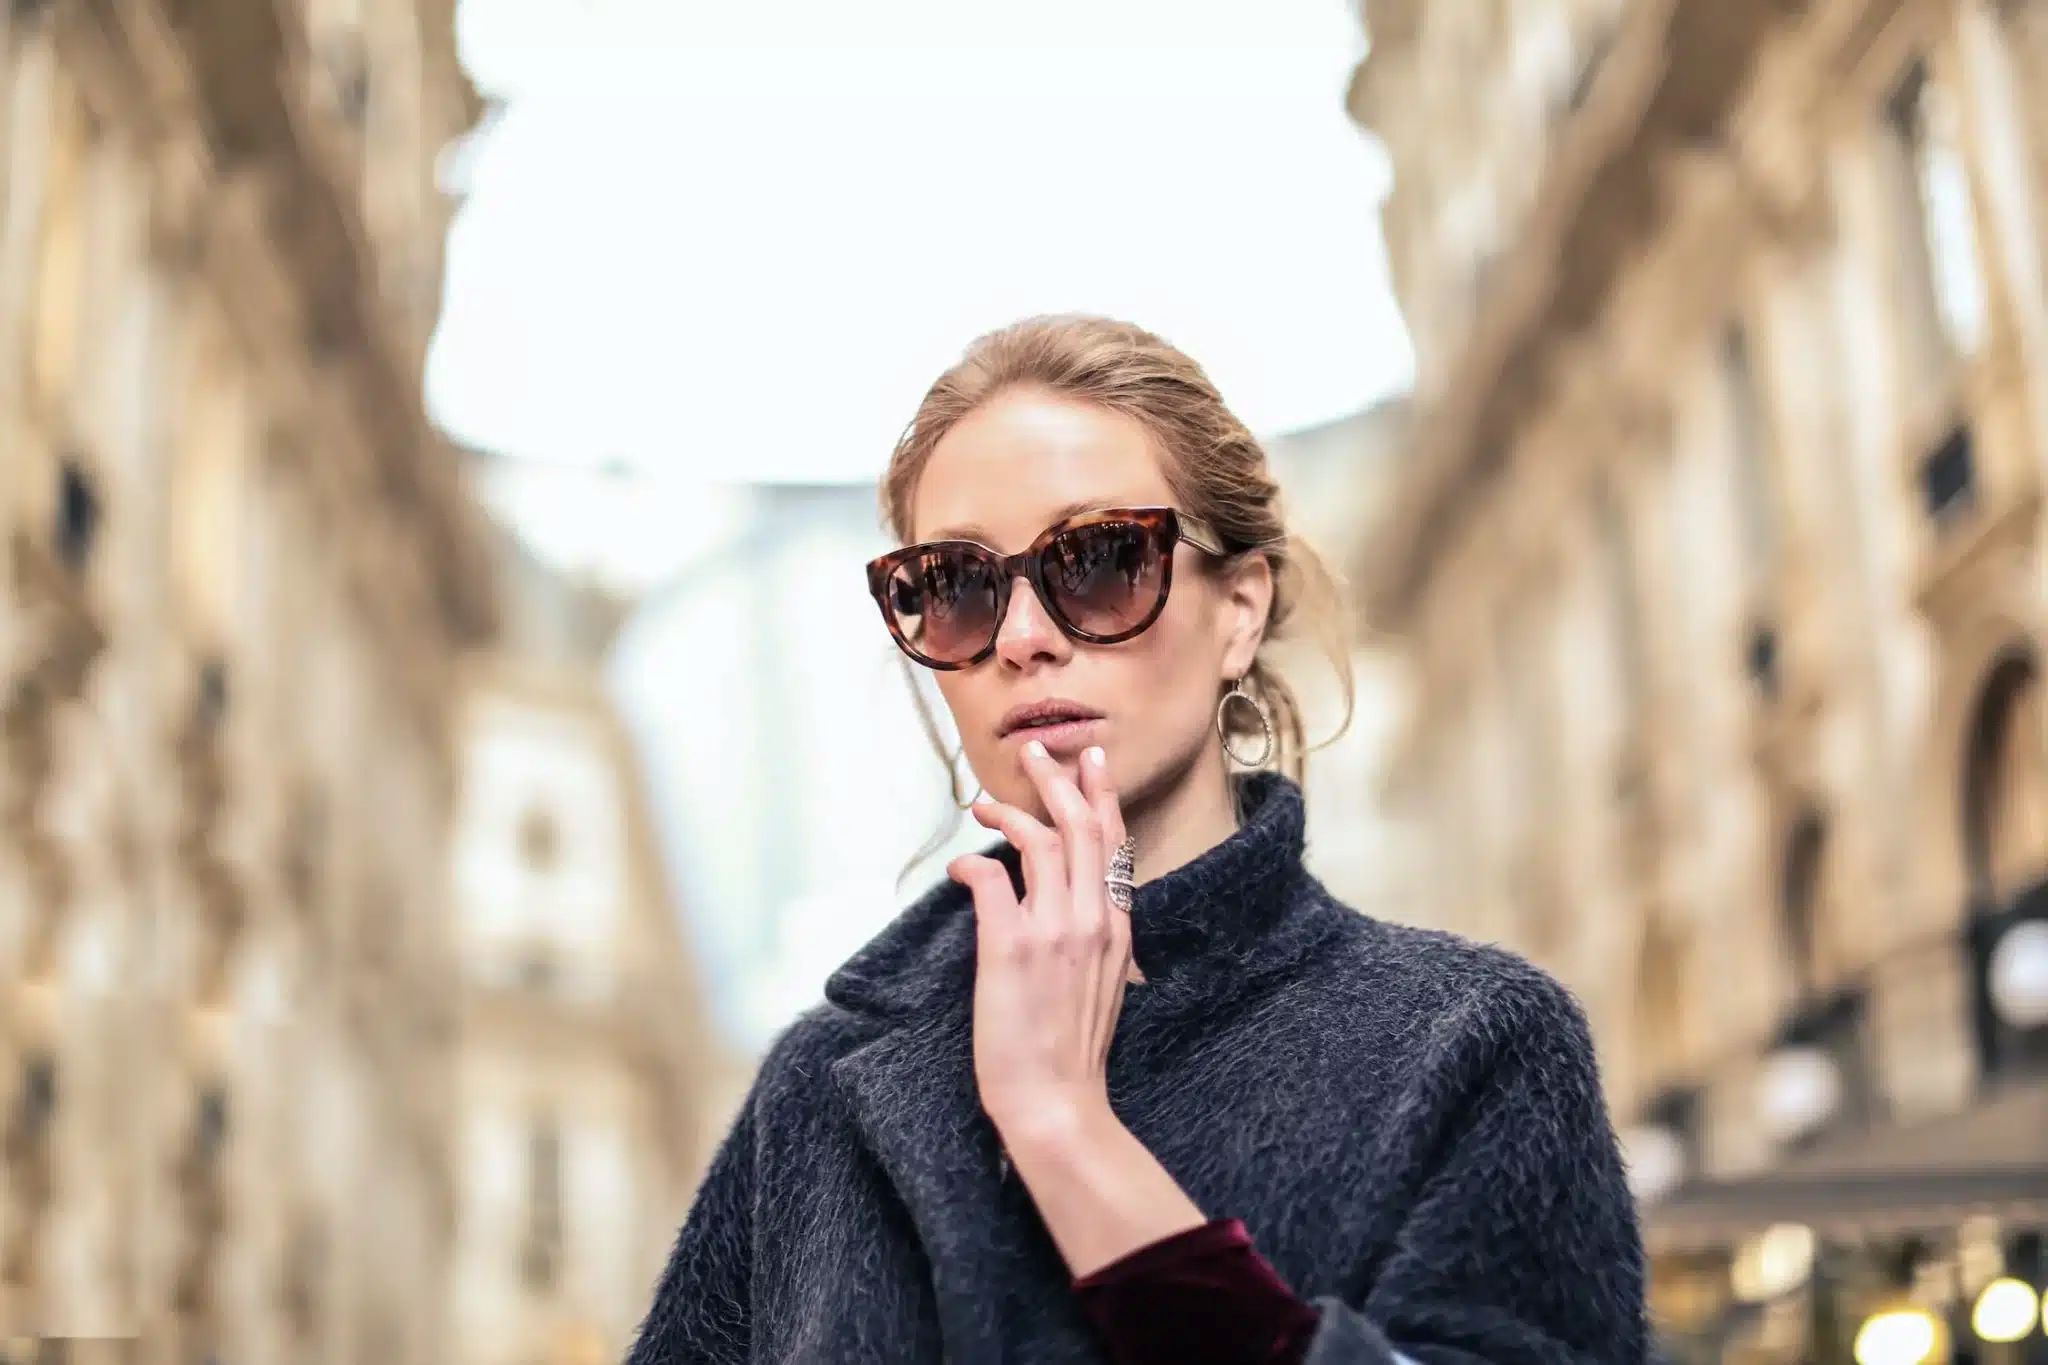 The Shocking Truth: Is It Rude For Blind Individuals To Wear Sunglasses Outdoors?